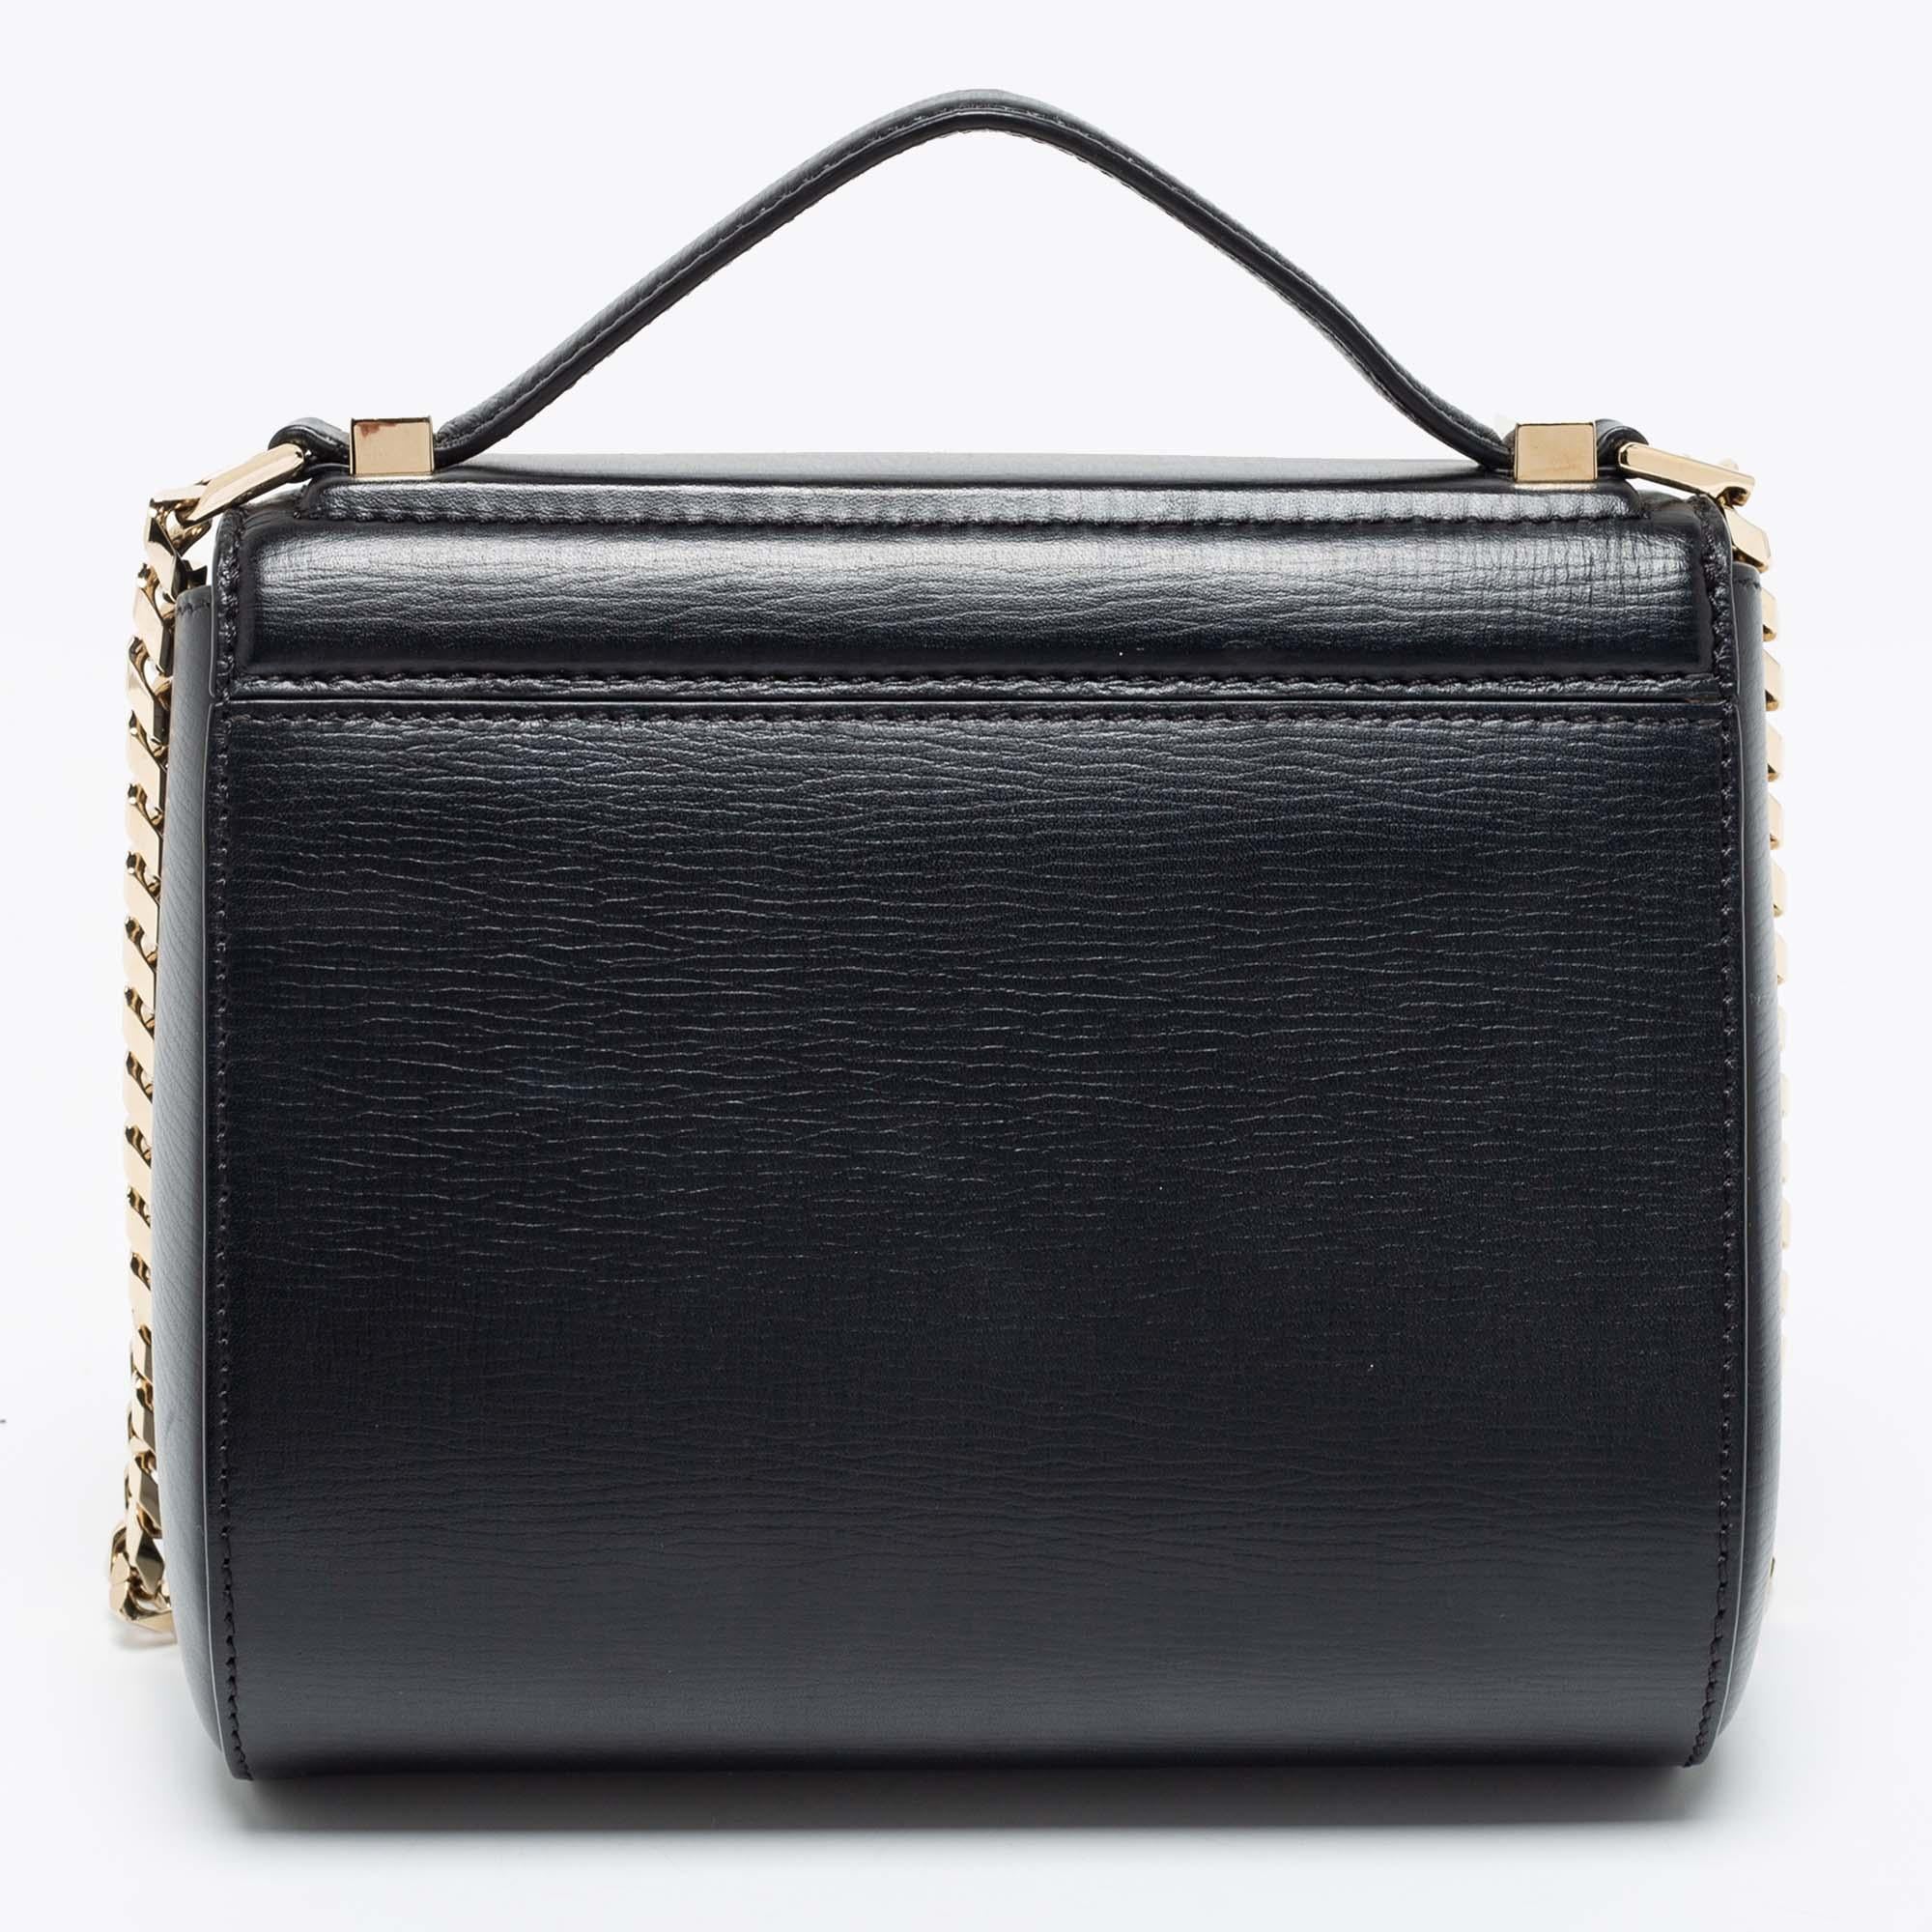 A new spin on Givenchy's original Pandora bag, this Givenchy Mini Pandora Box crossbody bag is crafted from black leather. While the expandable compartment offers plenty of storage for your valuables, the curb-link shoulder strap lends an edgy touch